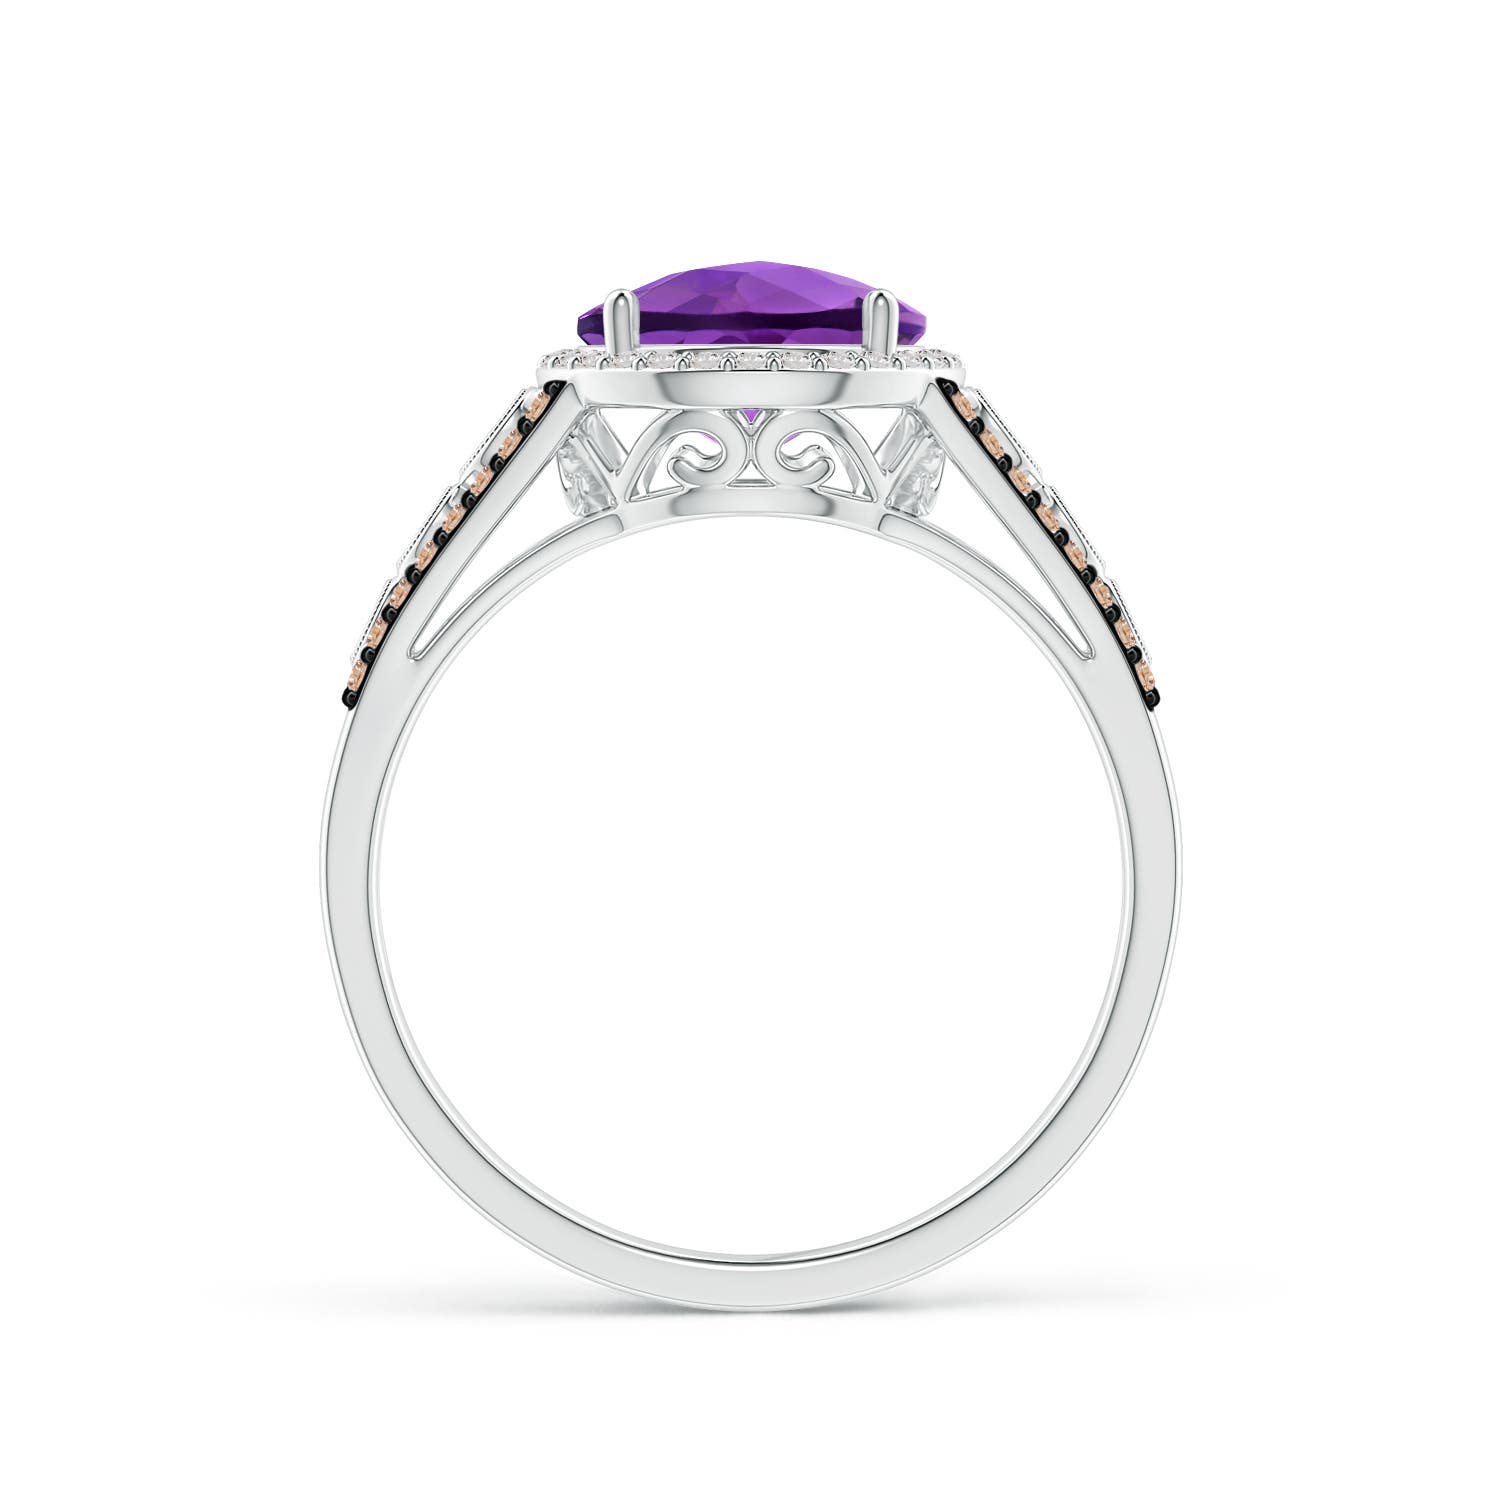 AA - Amethyst / 2.11 CT / 14 KT White Gold